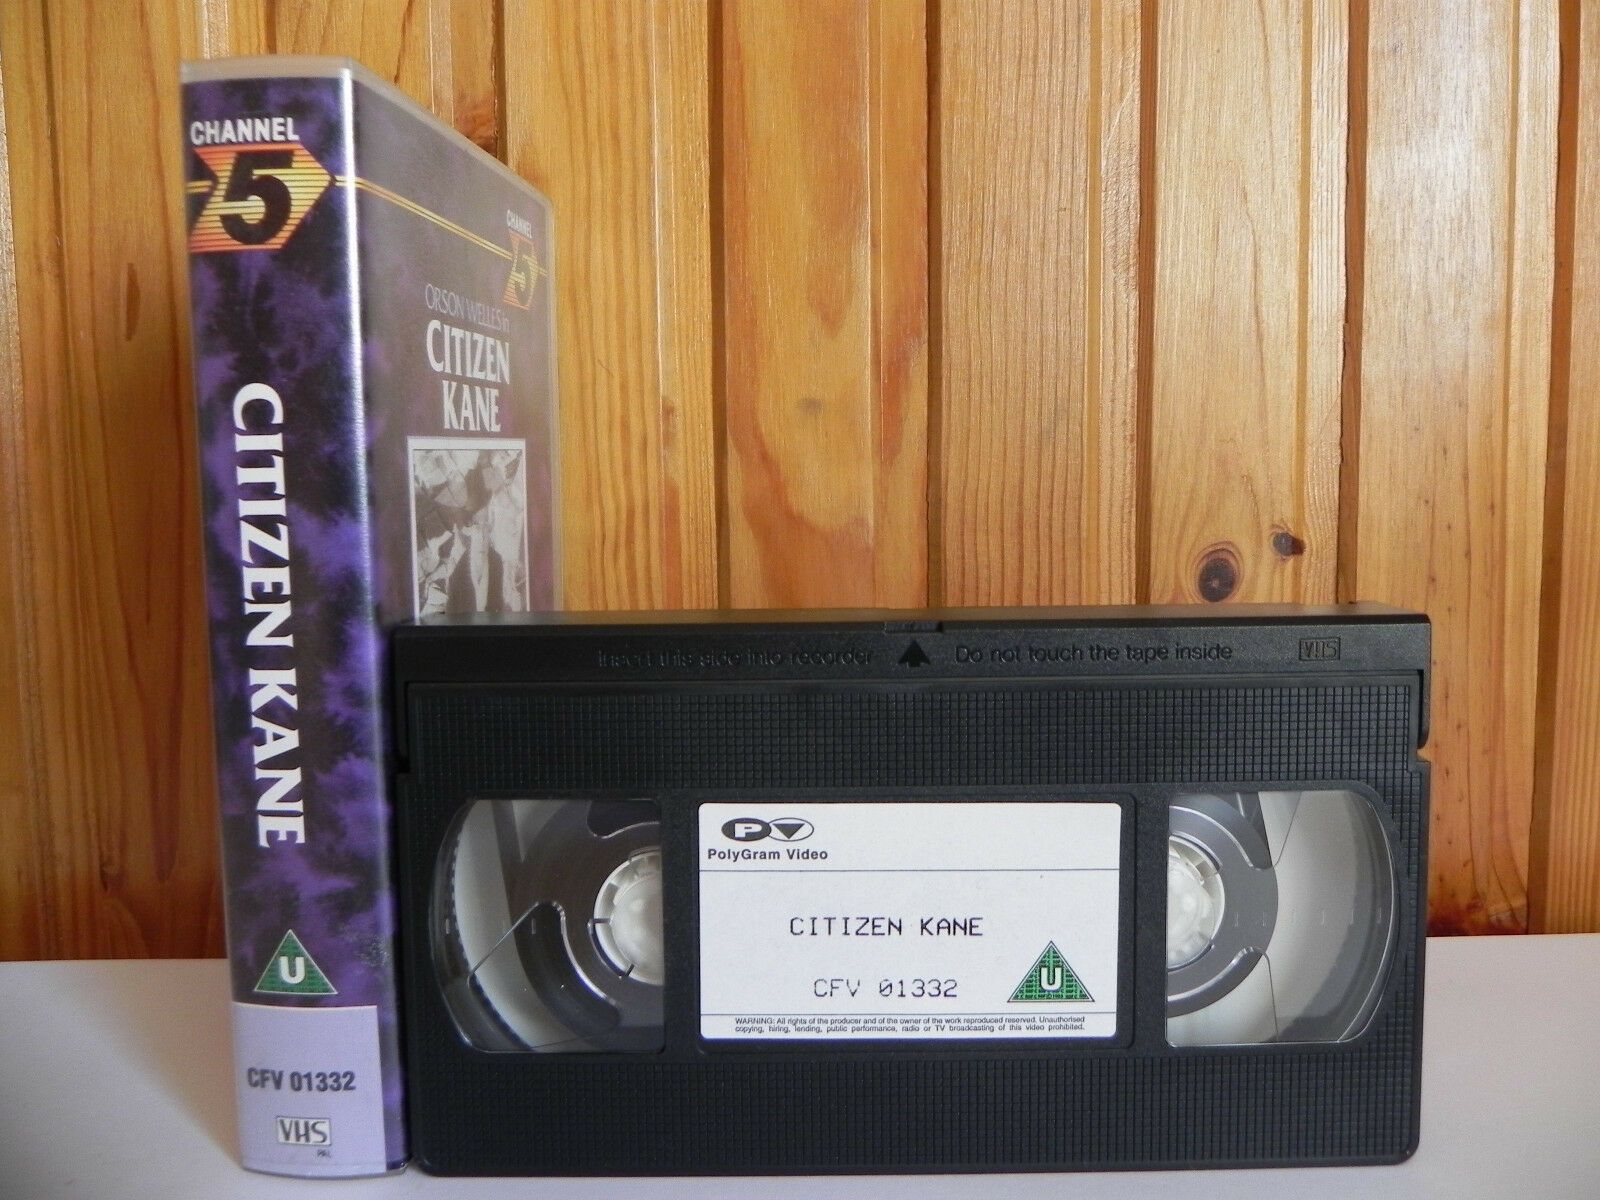 Citizen Kane - Channel 5 - Drama - Hollywood Greats - Orsen Welles - Pal VHS-